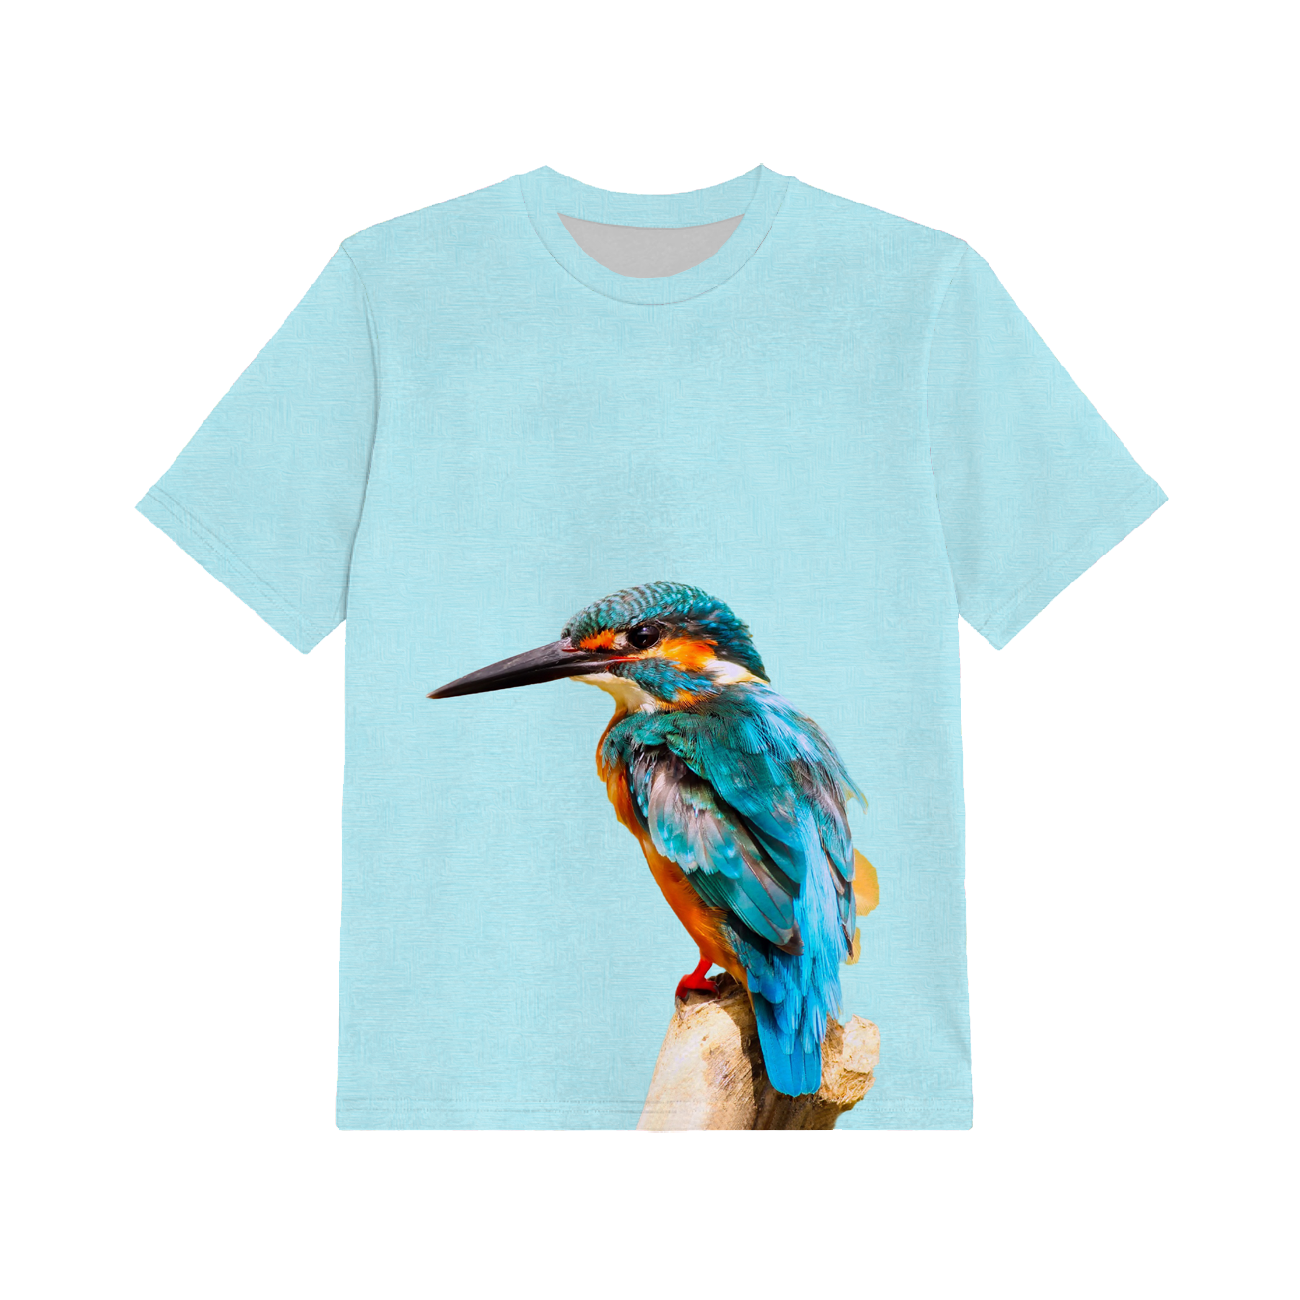 2-PACK - KID’S T-SHIRT - FOLKLORE AND KINGFISHER - sewing set